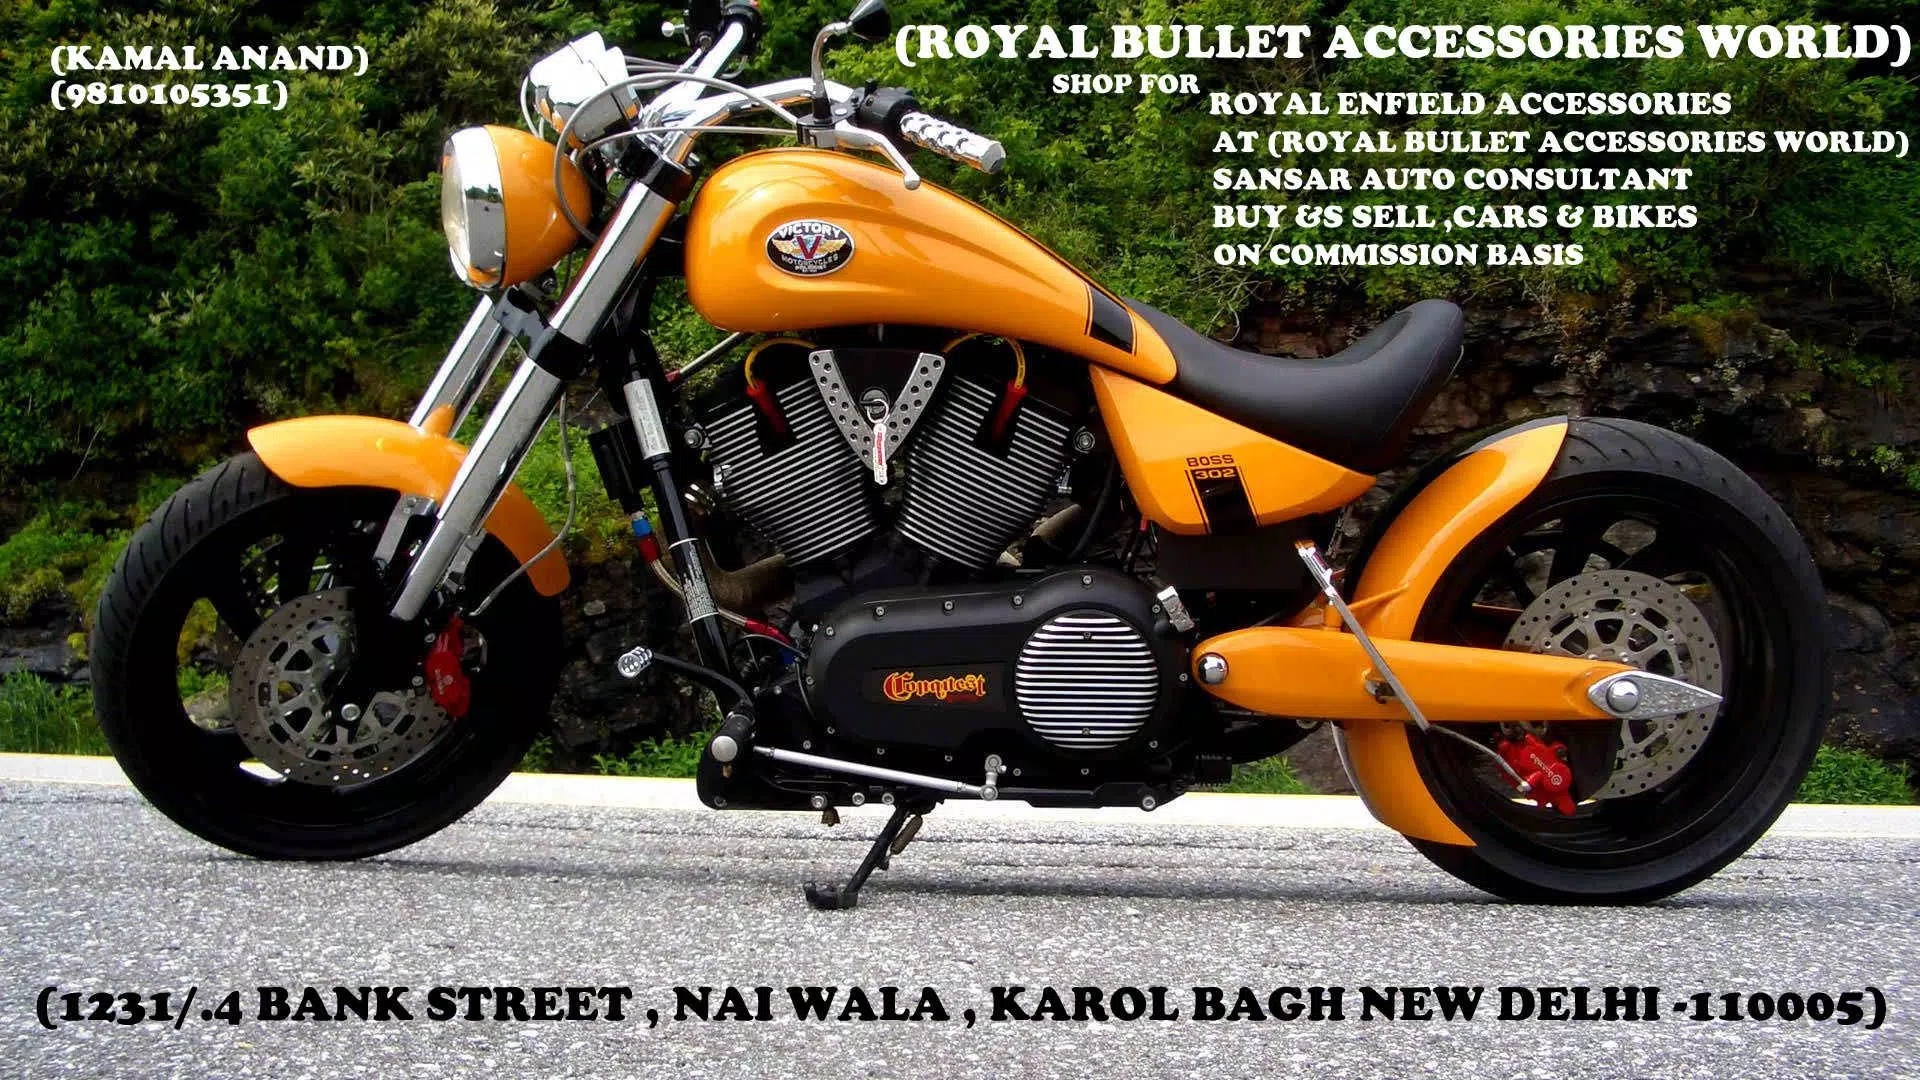 Royal Bullet Accessories World - One more Bull Modified and Accessories by  Royal Bullet Accessories World For more information WhatsApp 9810105351 or  Call 011-28751475